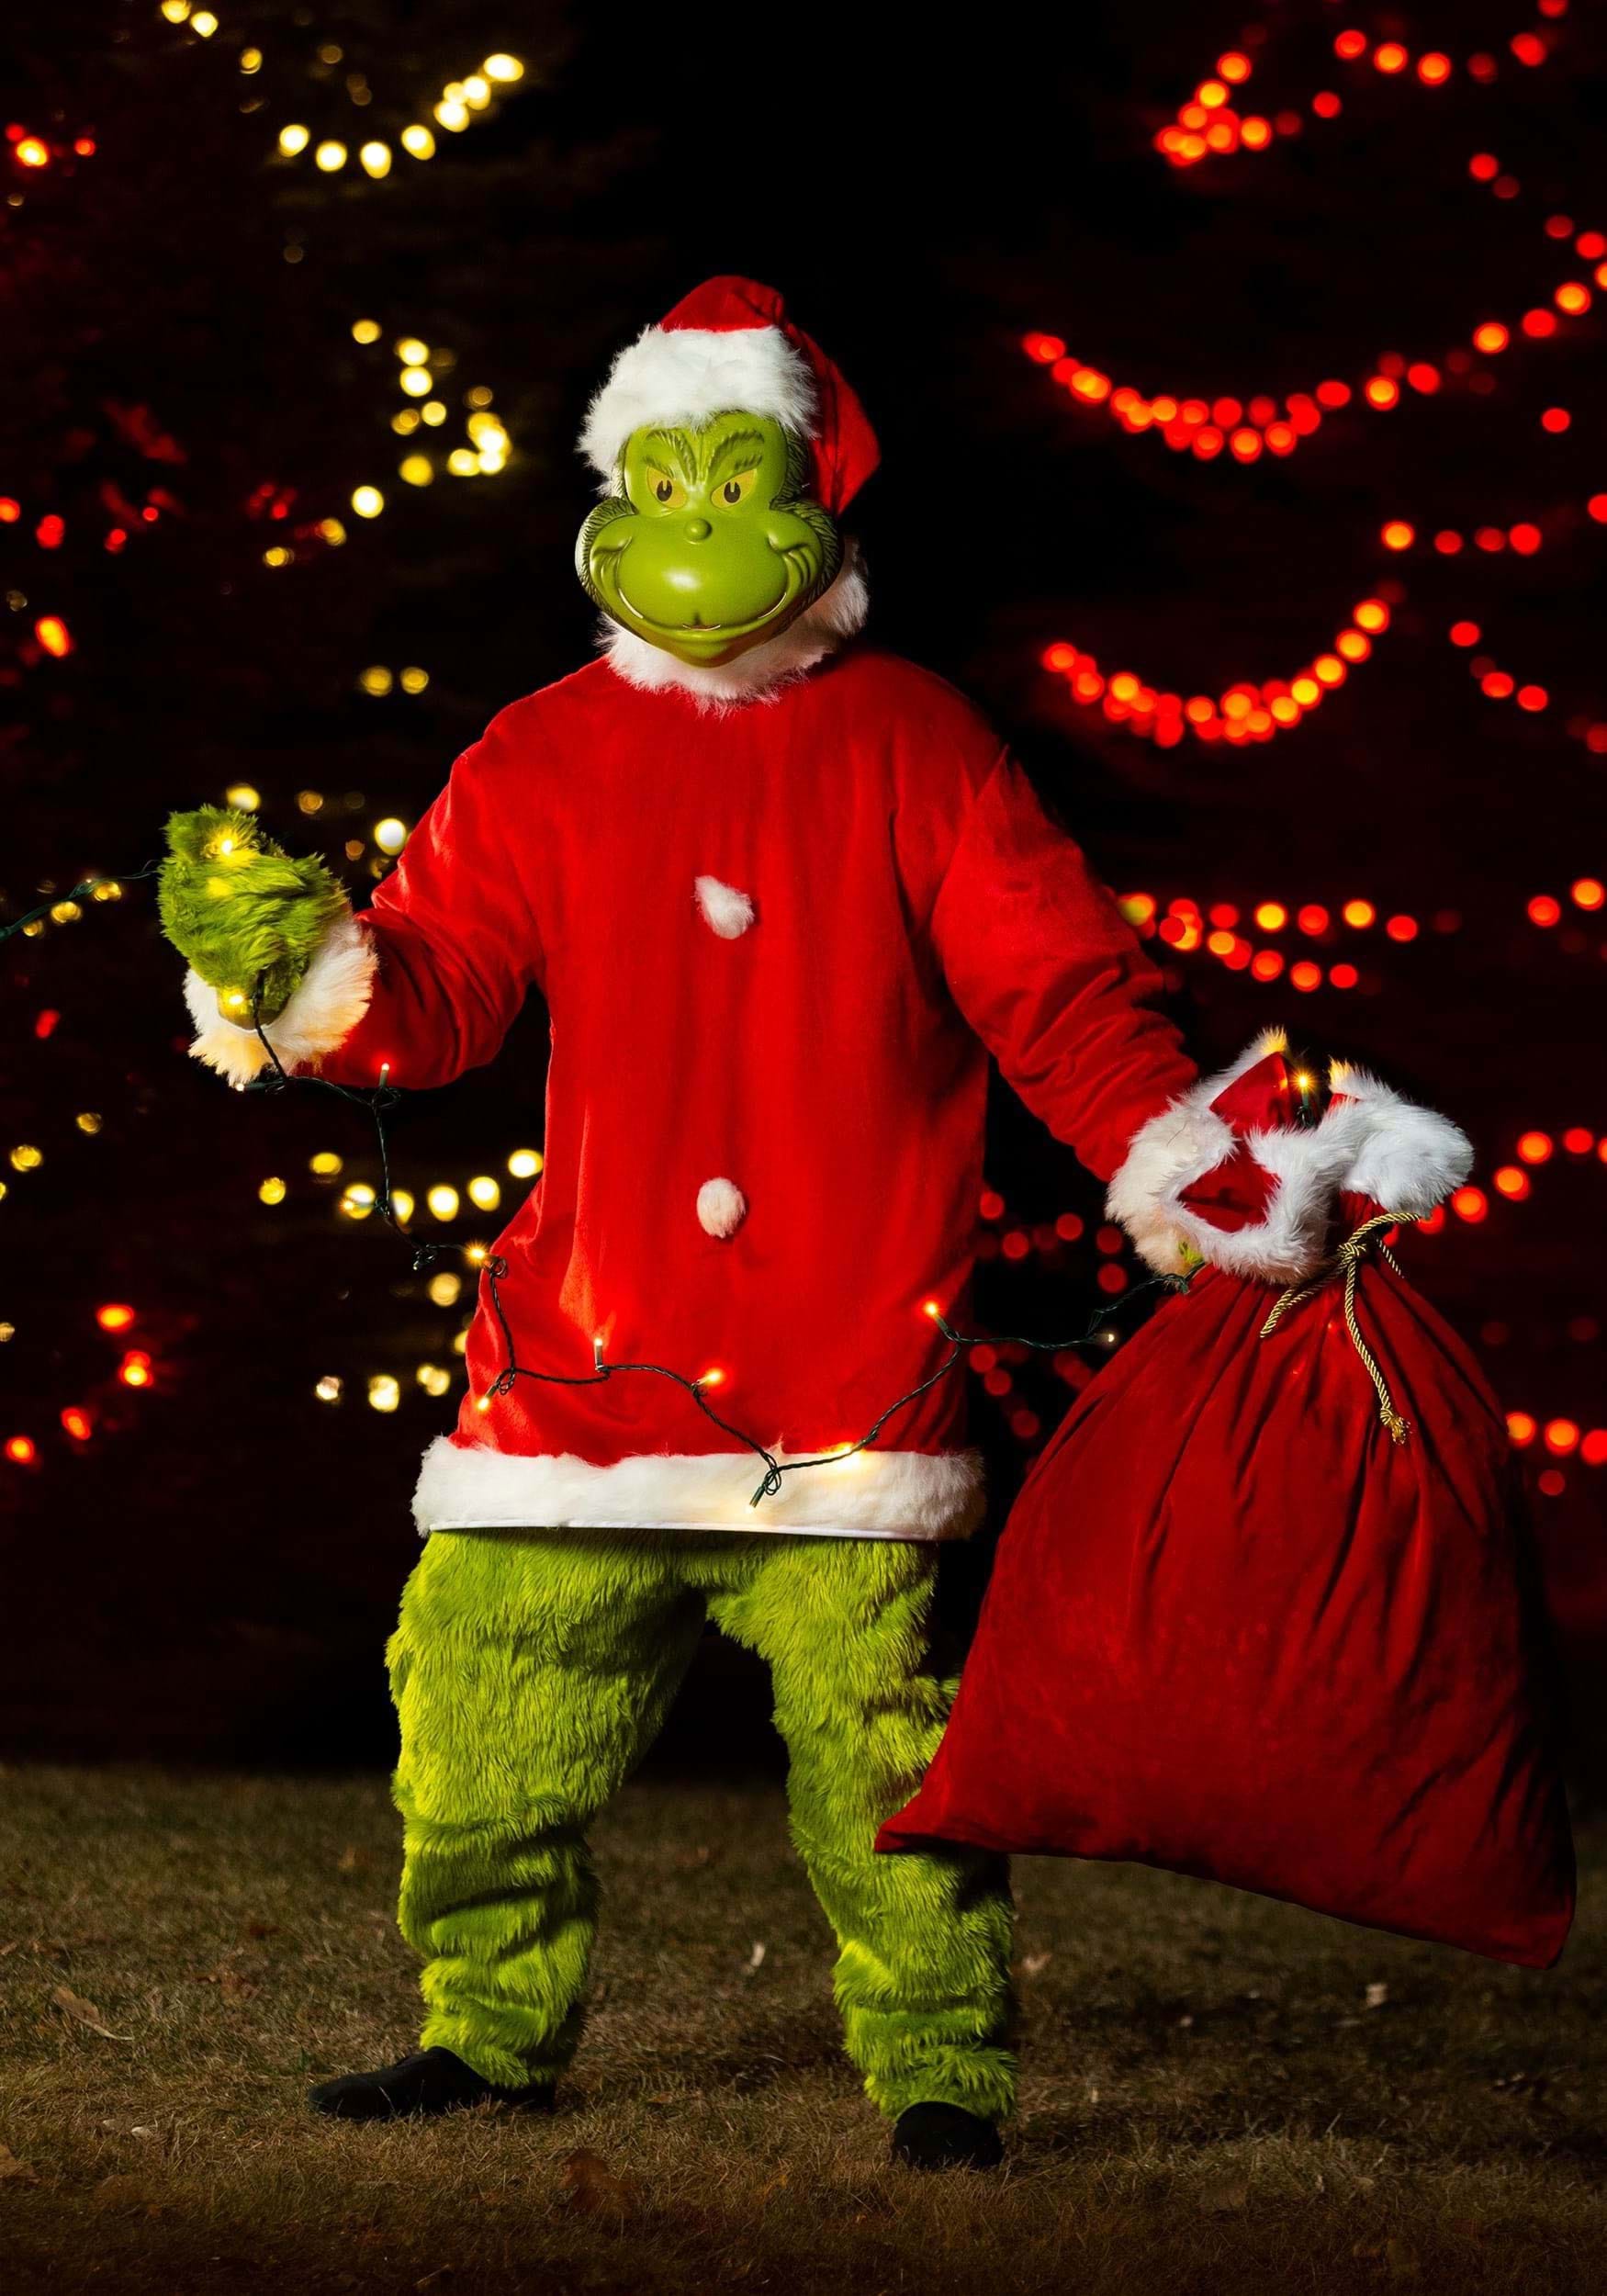 https://images.fun.com/products/80008/1-1/the-grinch-santa-adult-plus-size-deluxe-costume.jpg